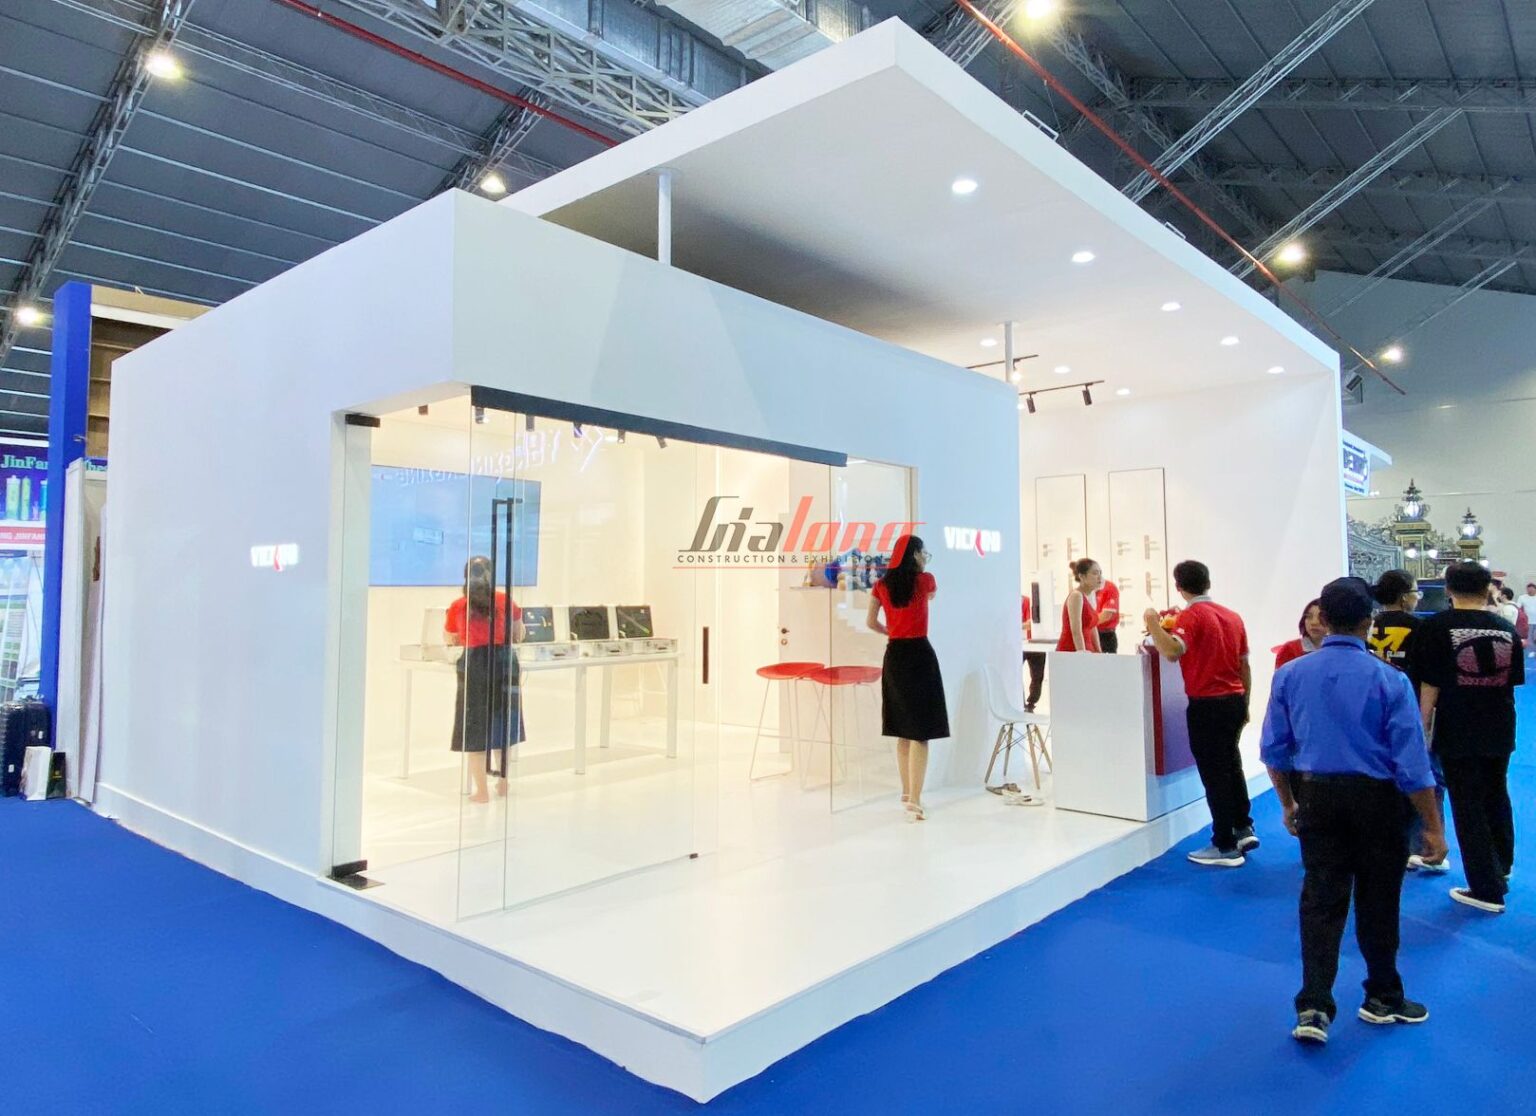 The exhibition booth was made by Gia Long